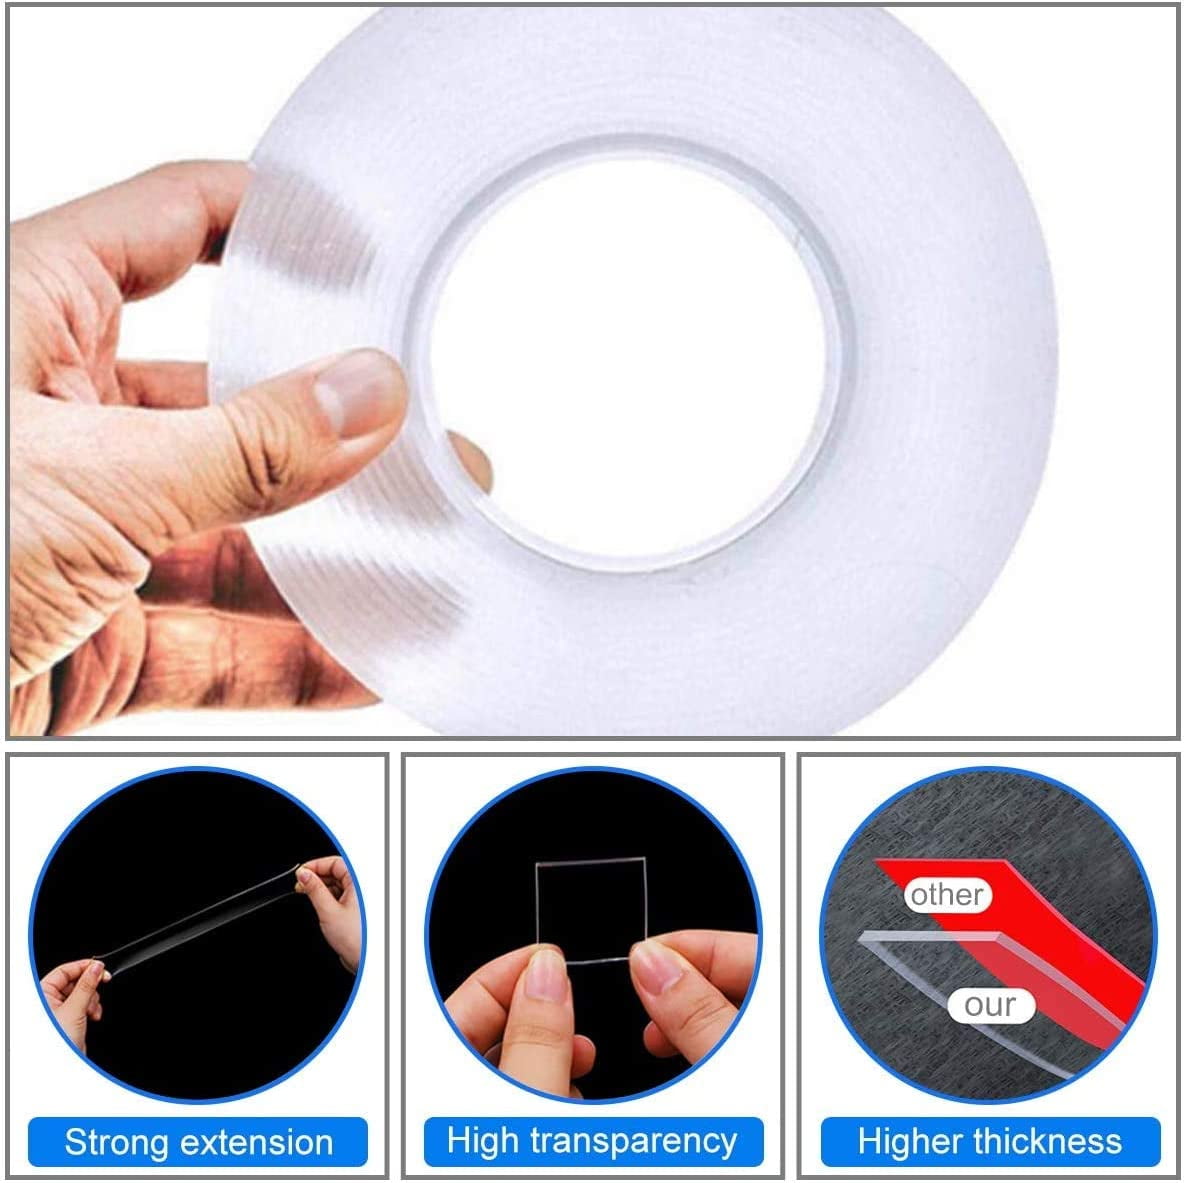 Removable Clear Double Sided Sticky Tape- No Residue, 2 Inches x 20 Yards